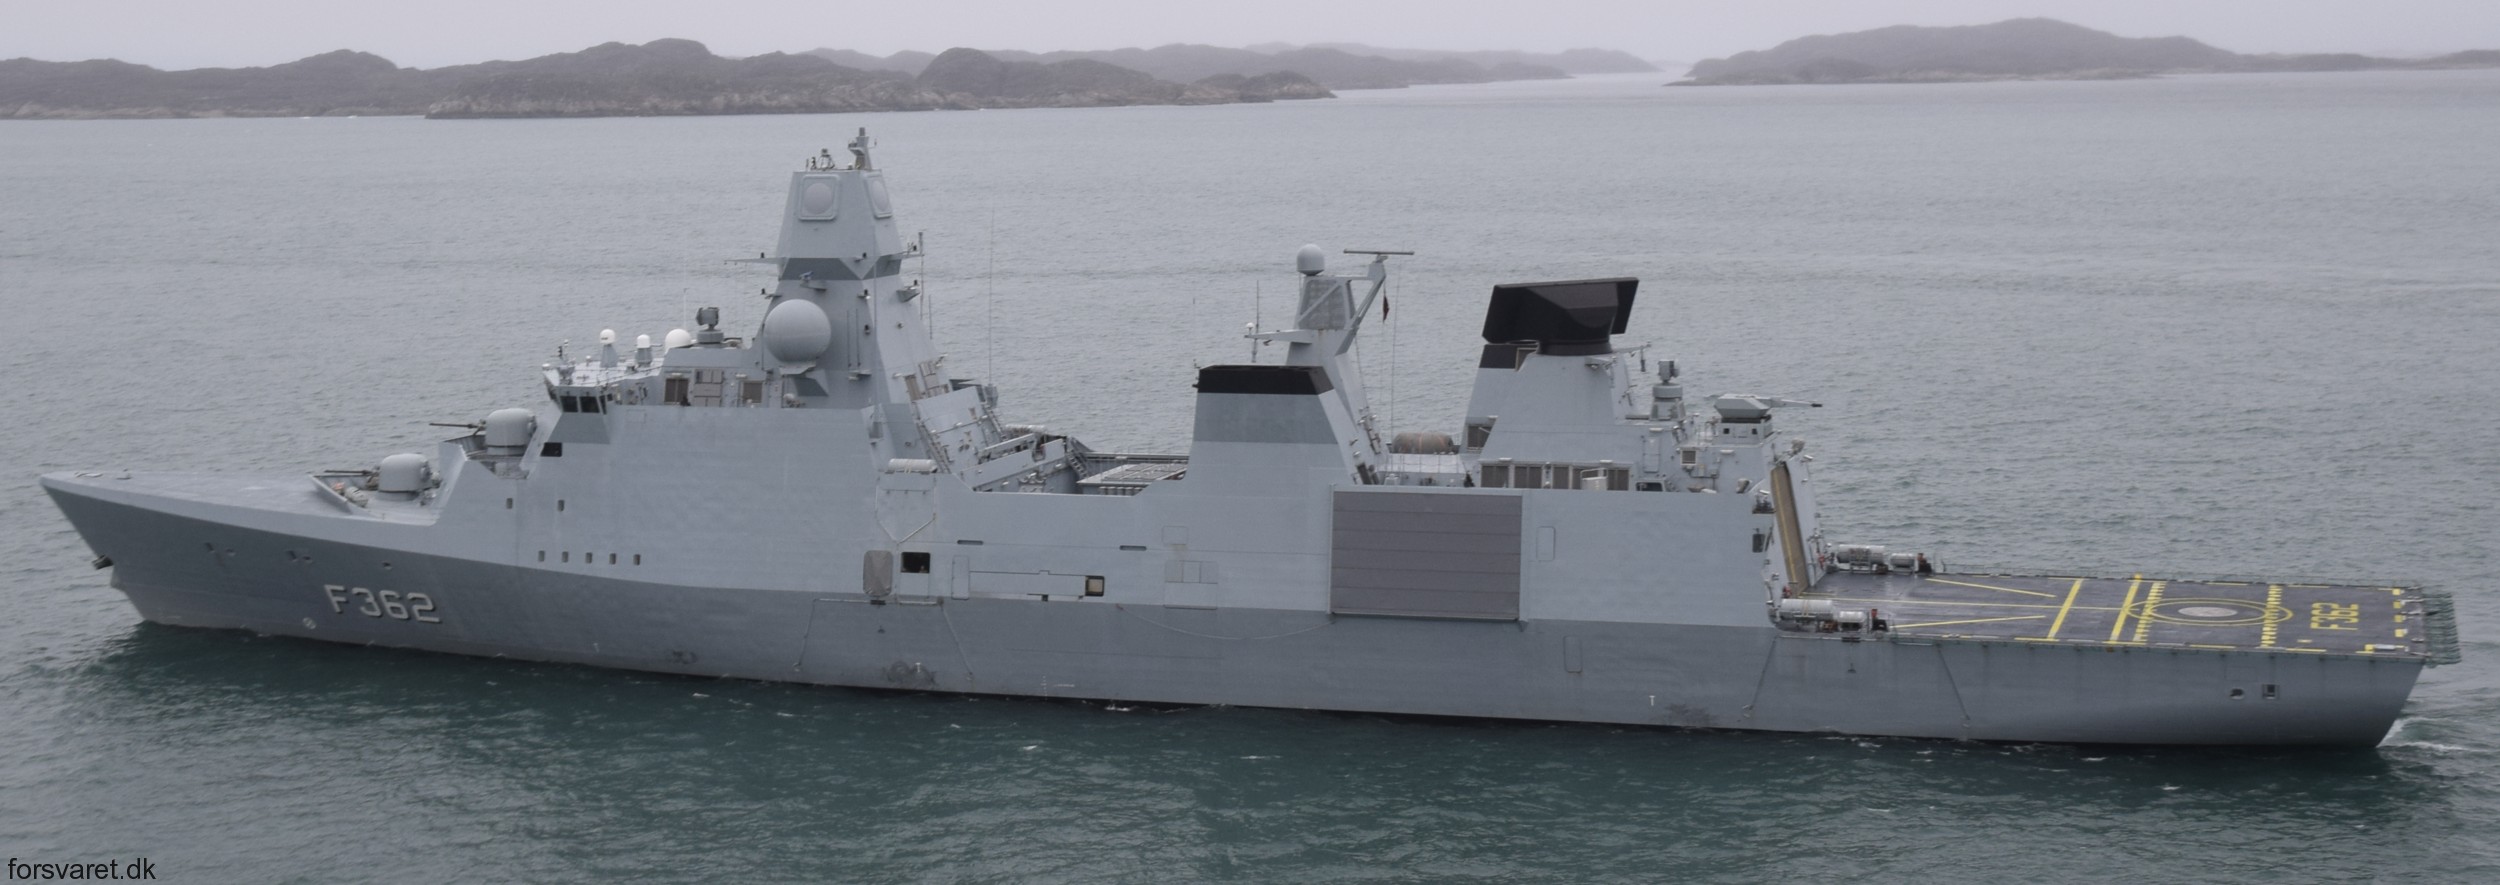 f-362 hdms peter willemoes iver huitfeldt class guided missile frigate ffg royal danish navy 23